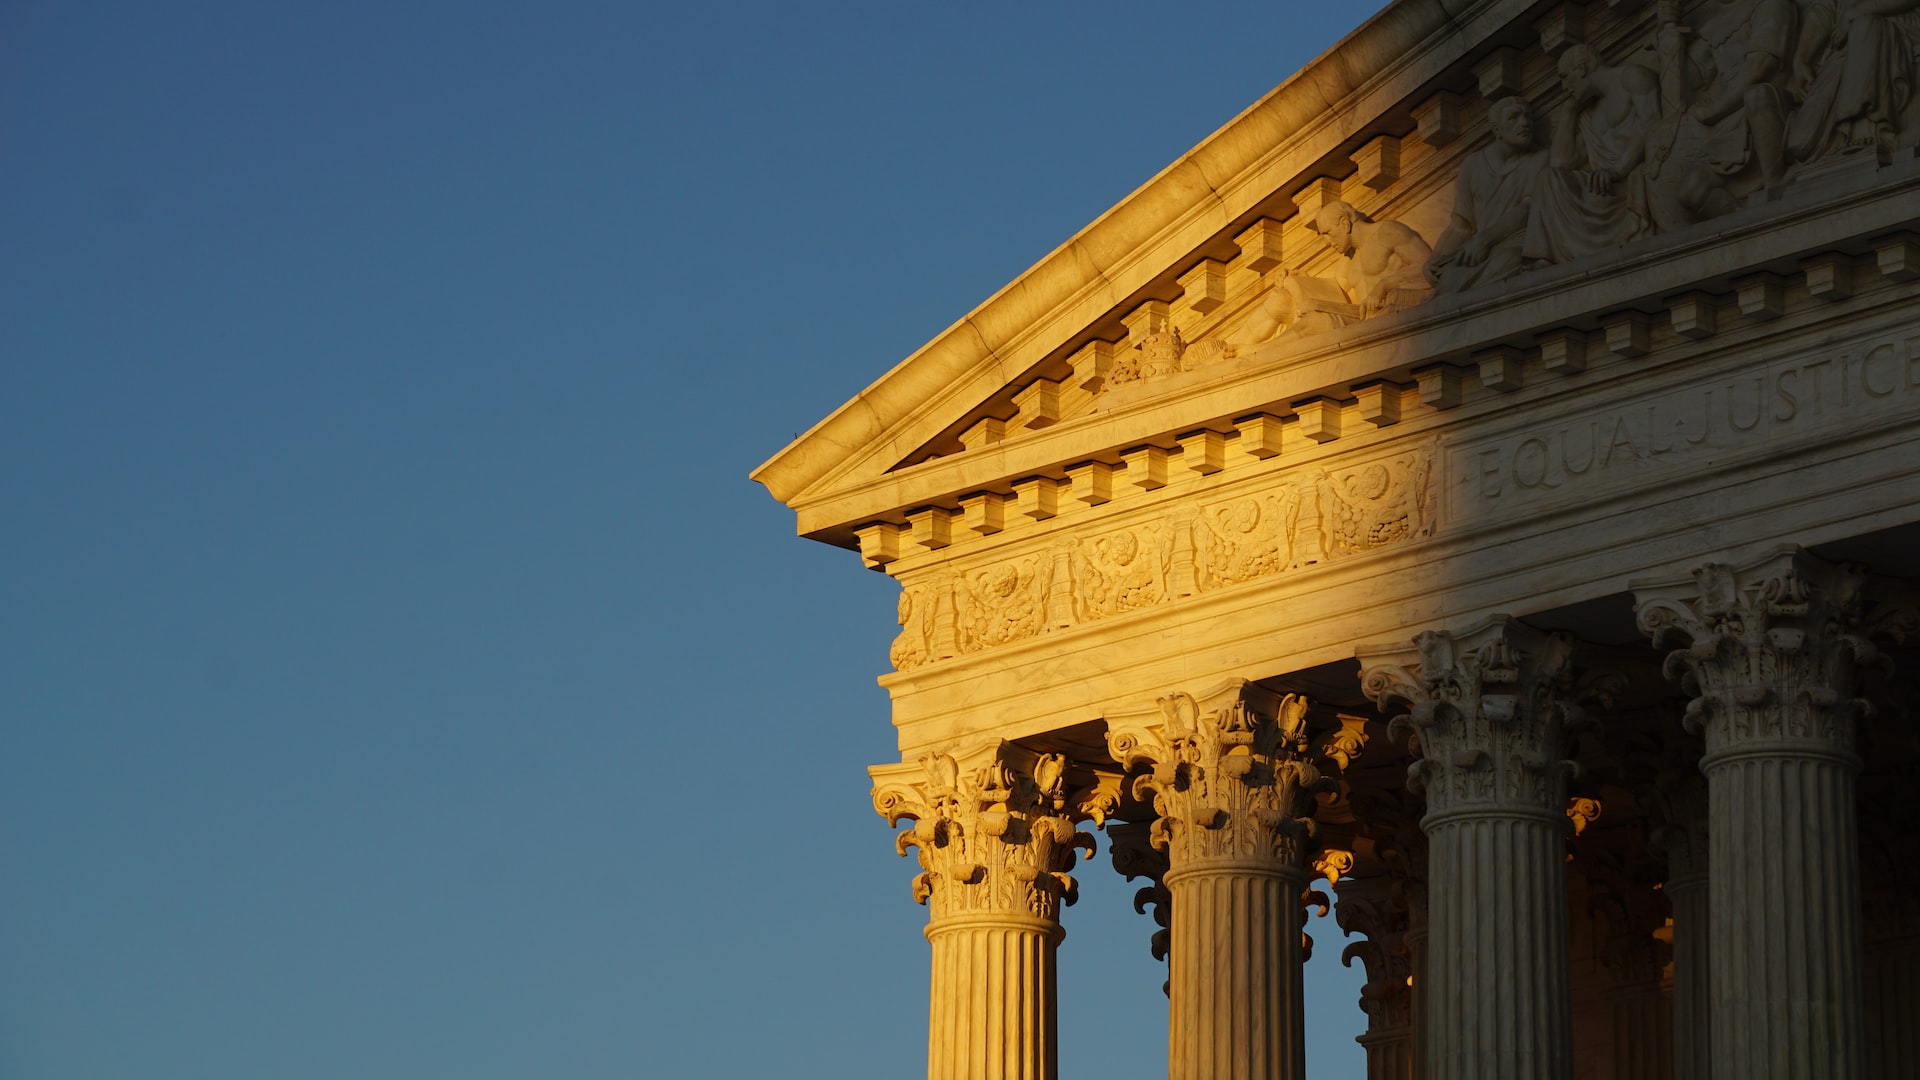 Partly shaded upper left corner of the U.S. Supreme Court and its columns against a cloudless light blue sky